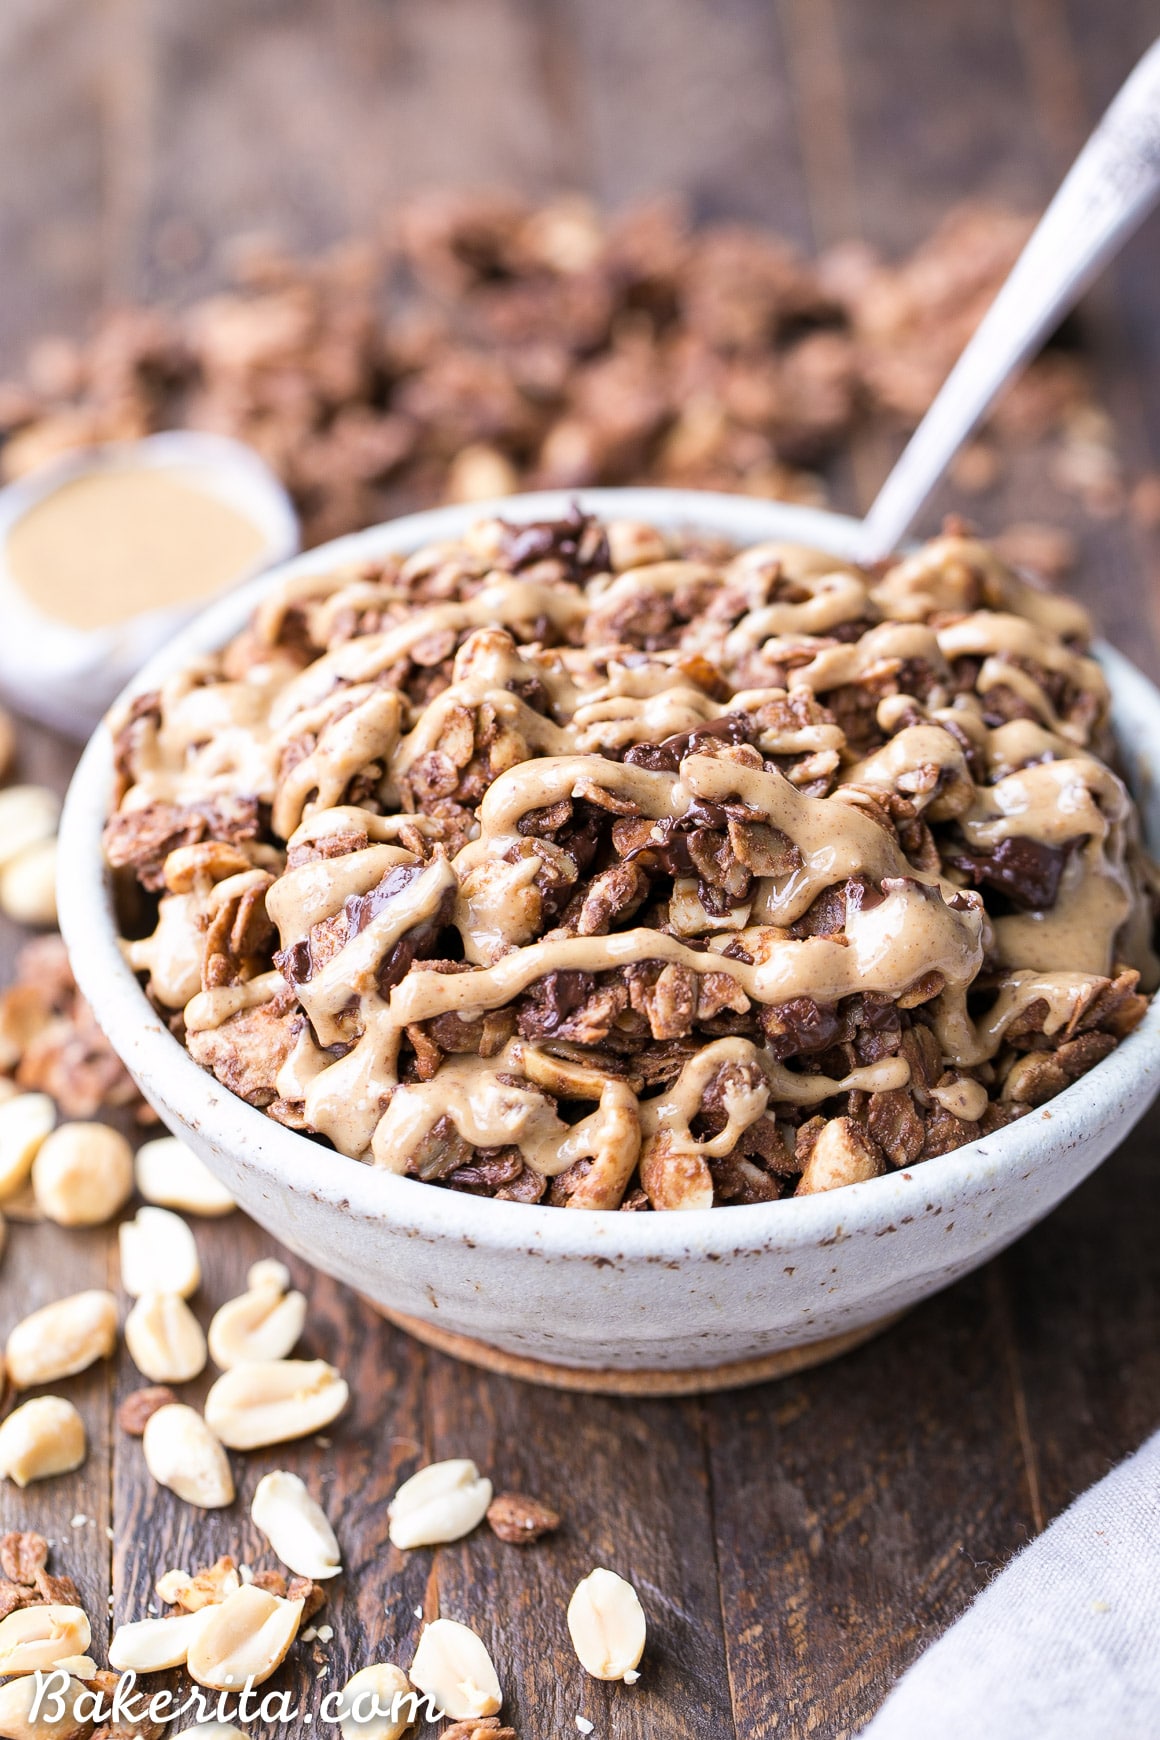 This Chocolate Peanut Butter Granola is the perfect indulgent breakfast or snack. It's gluten-free, dairy-free, vegan and refined sugar-free, and it tastes like dessert that you can have for breakfast!